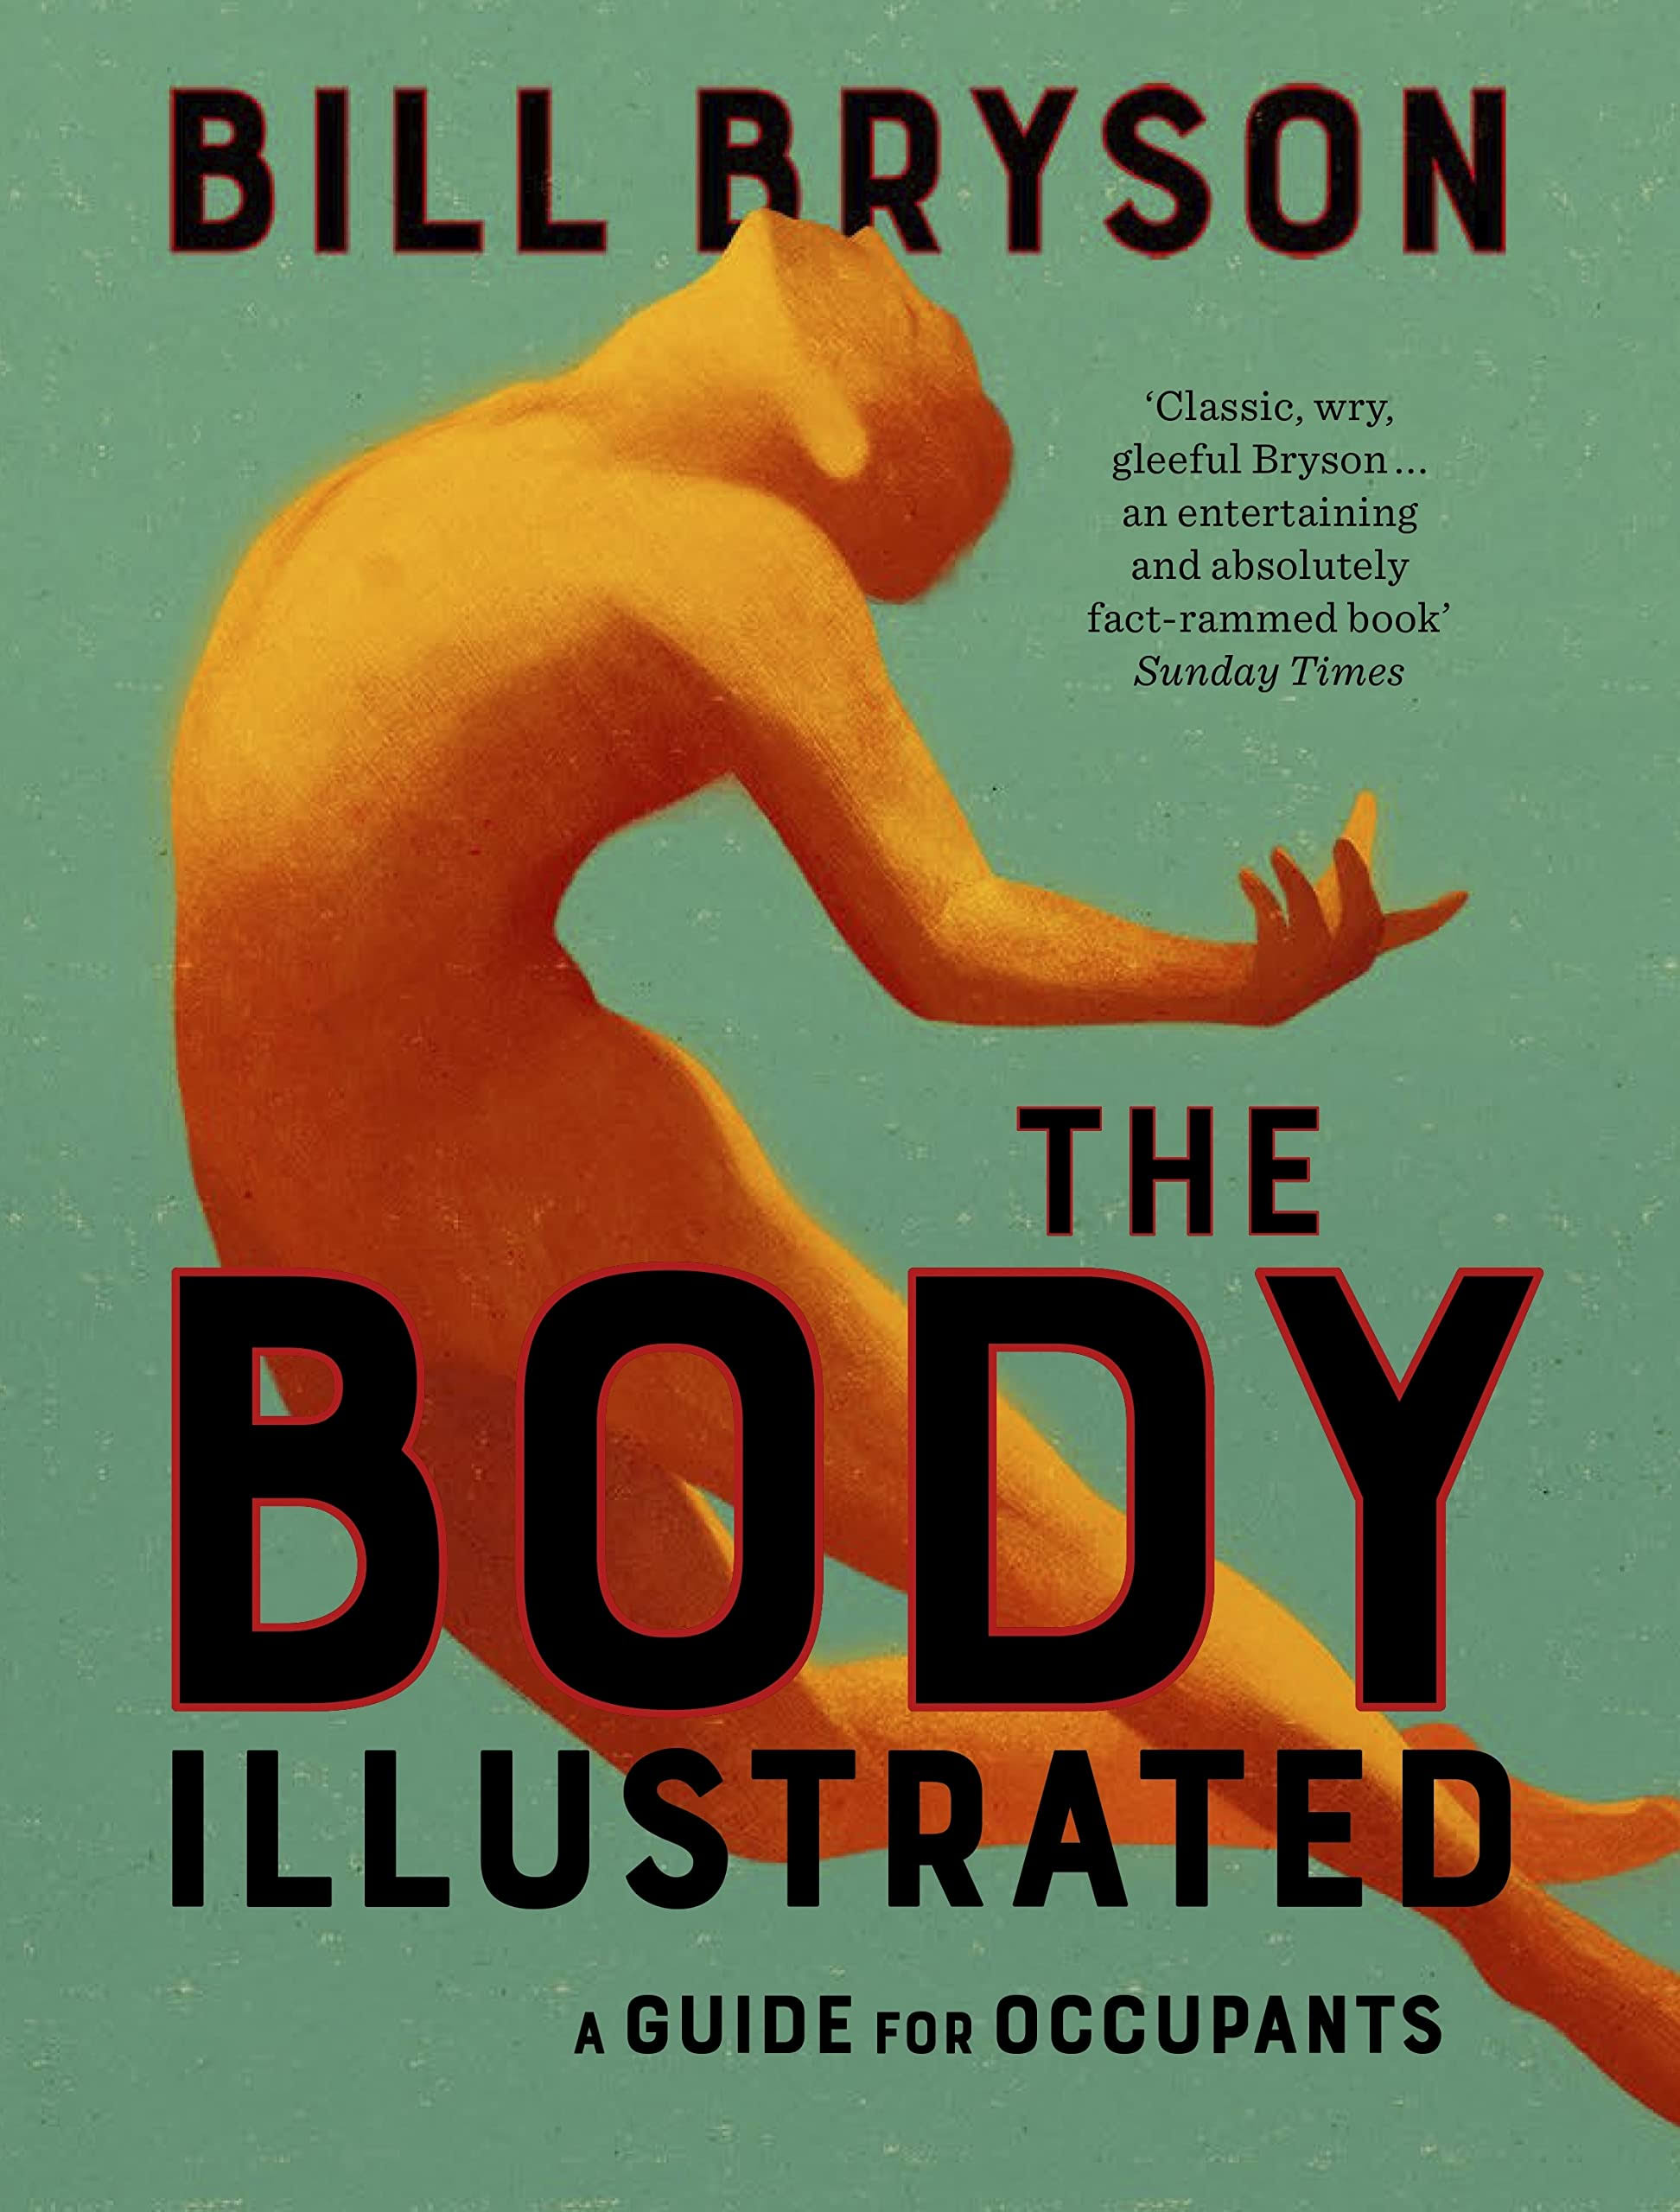 The Body Illustrated by Bill Bryson